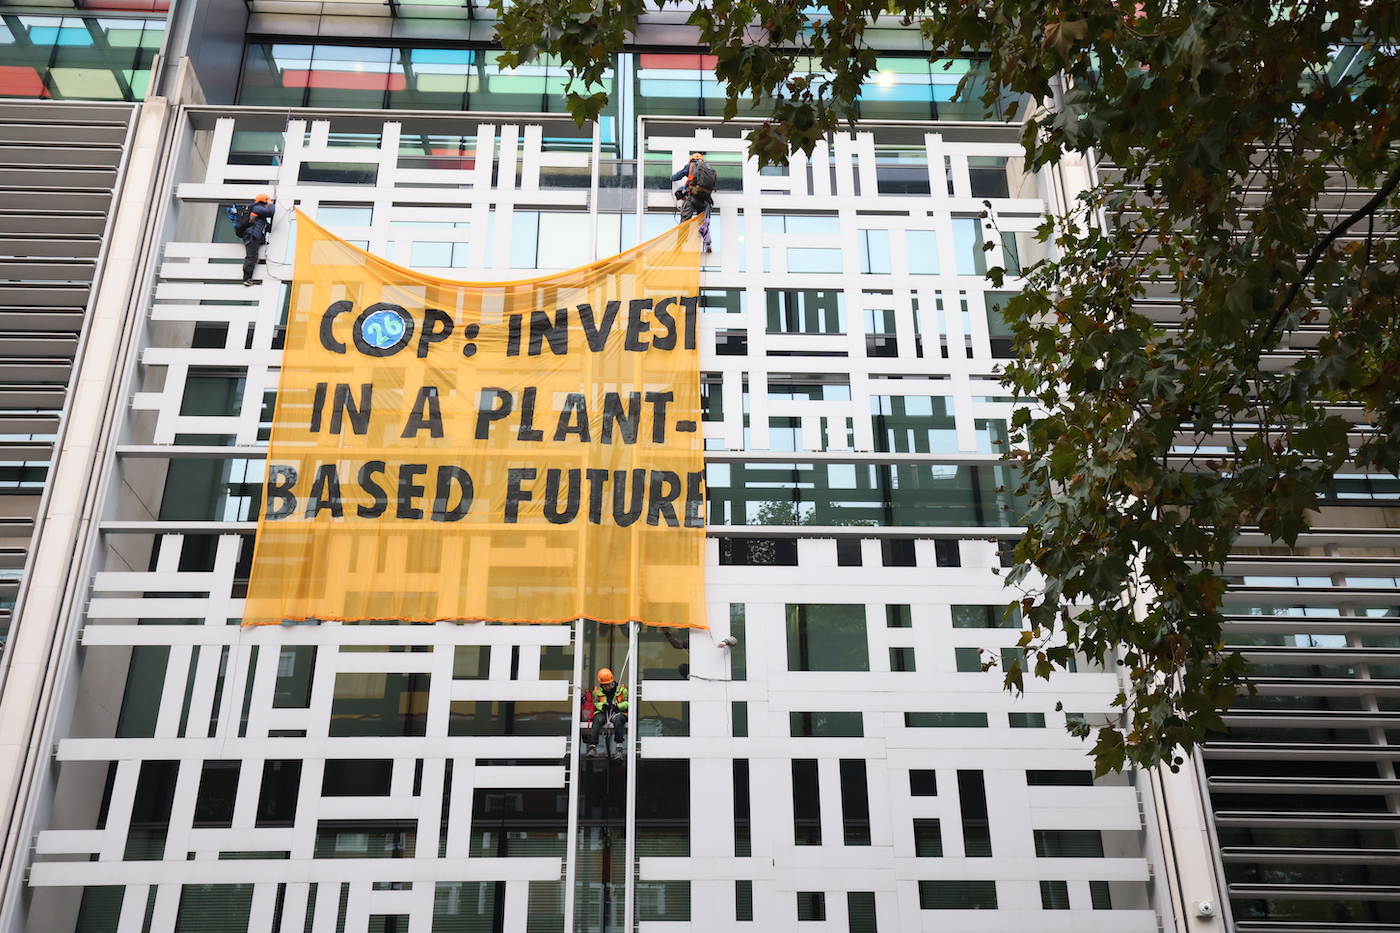 A sign on a building says "COP: Invest in a plant-based future"